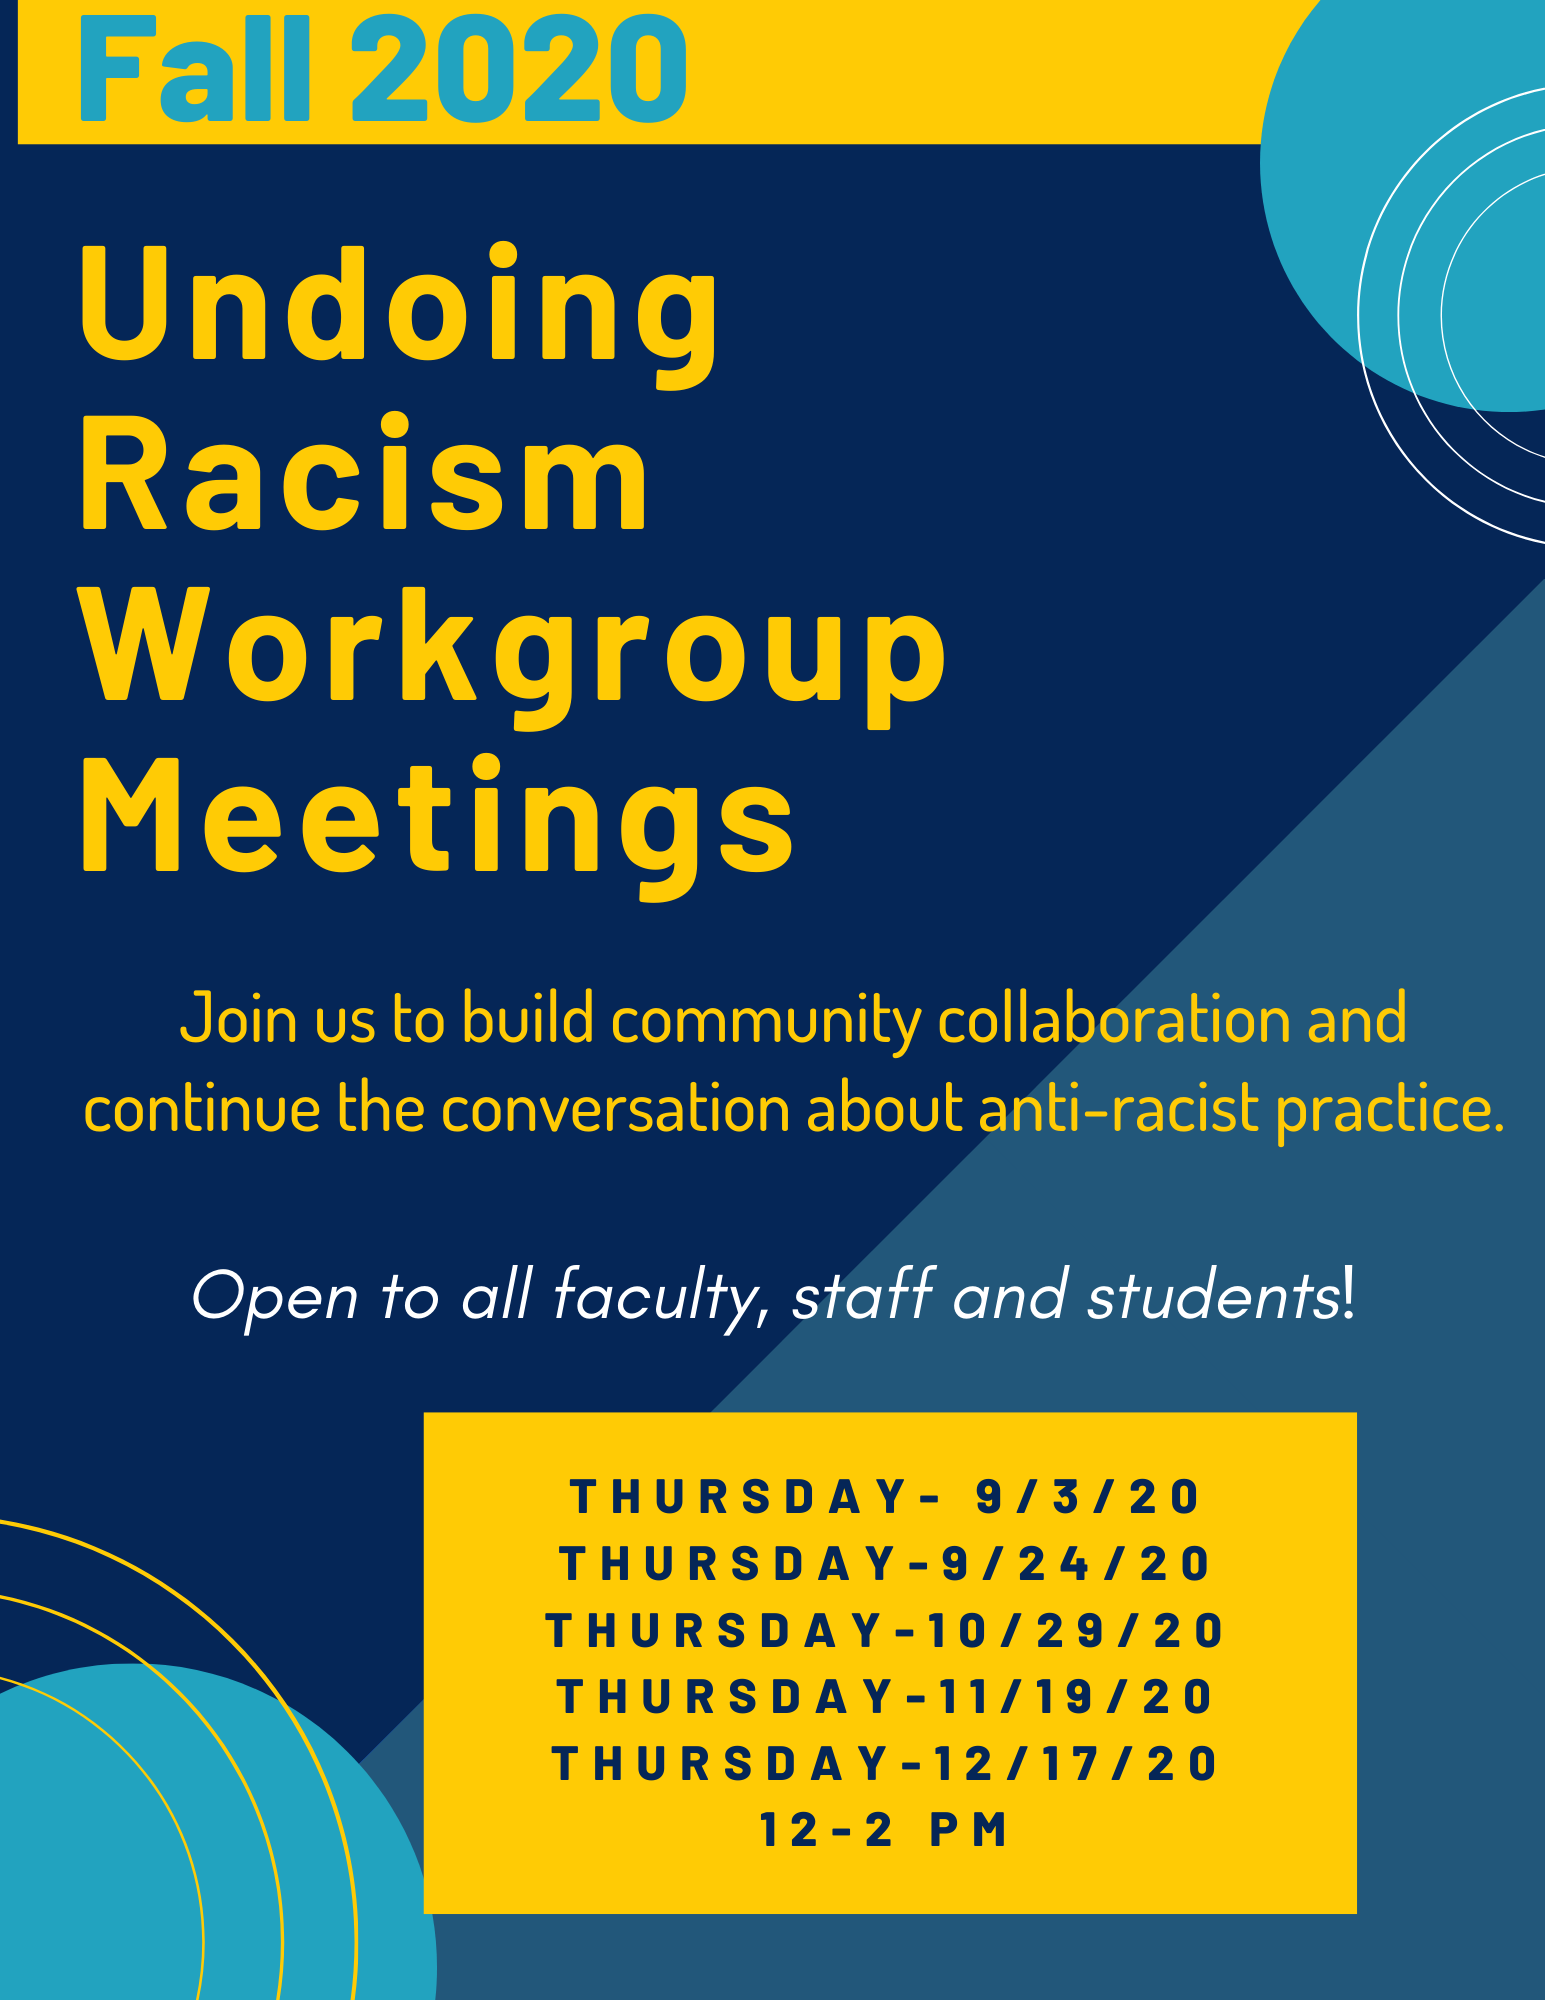 Undoing Racism Workgroup Meeting 10 29 2020 12 00 Pm To 2 00 Pm University Of Michigan School Of Social Work